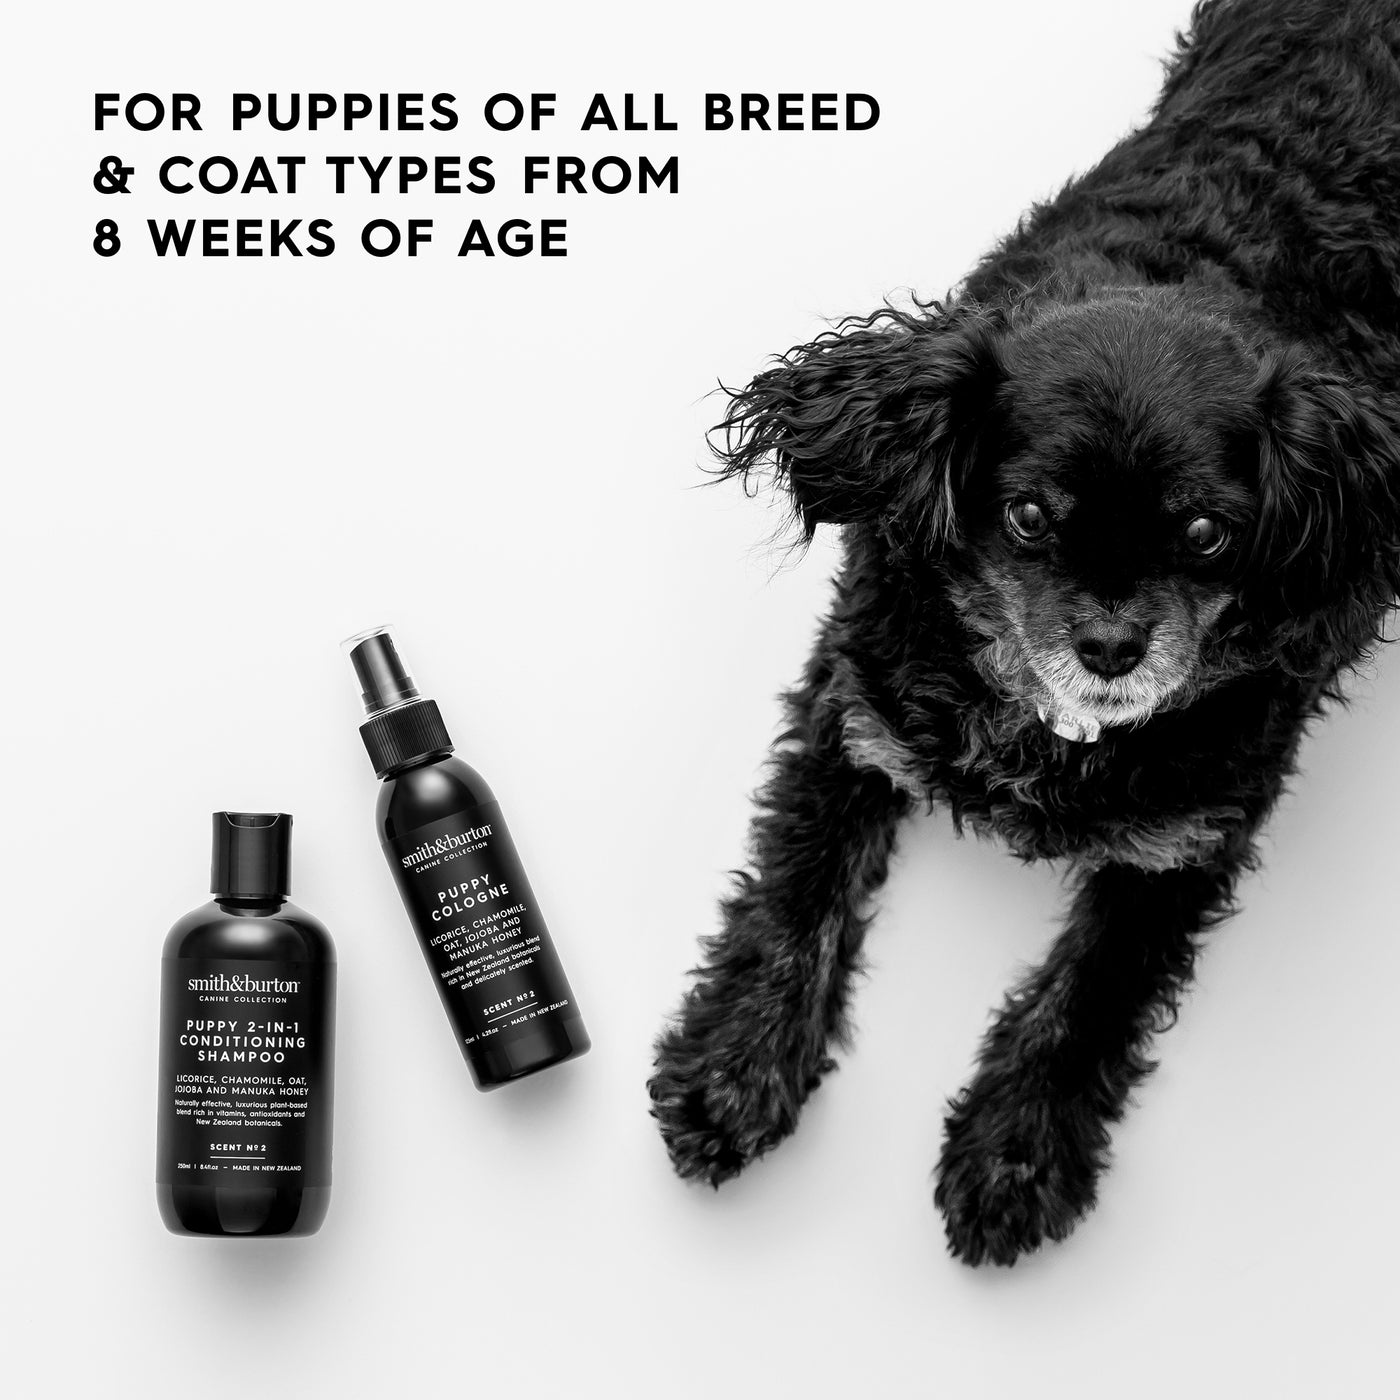 Puppy 2-in-1 Conditioning Shampoo